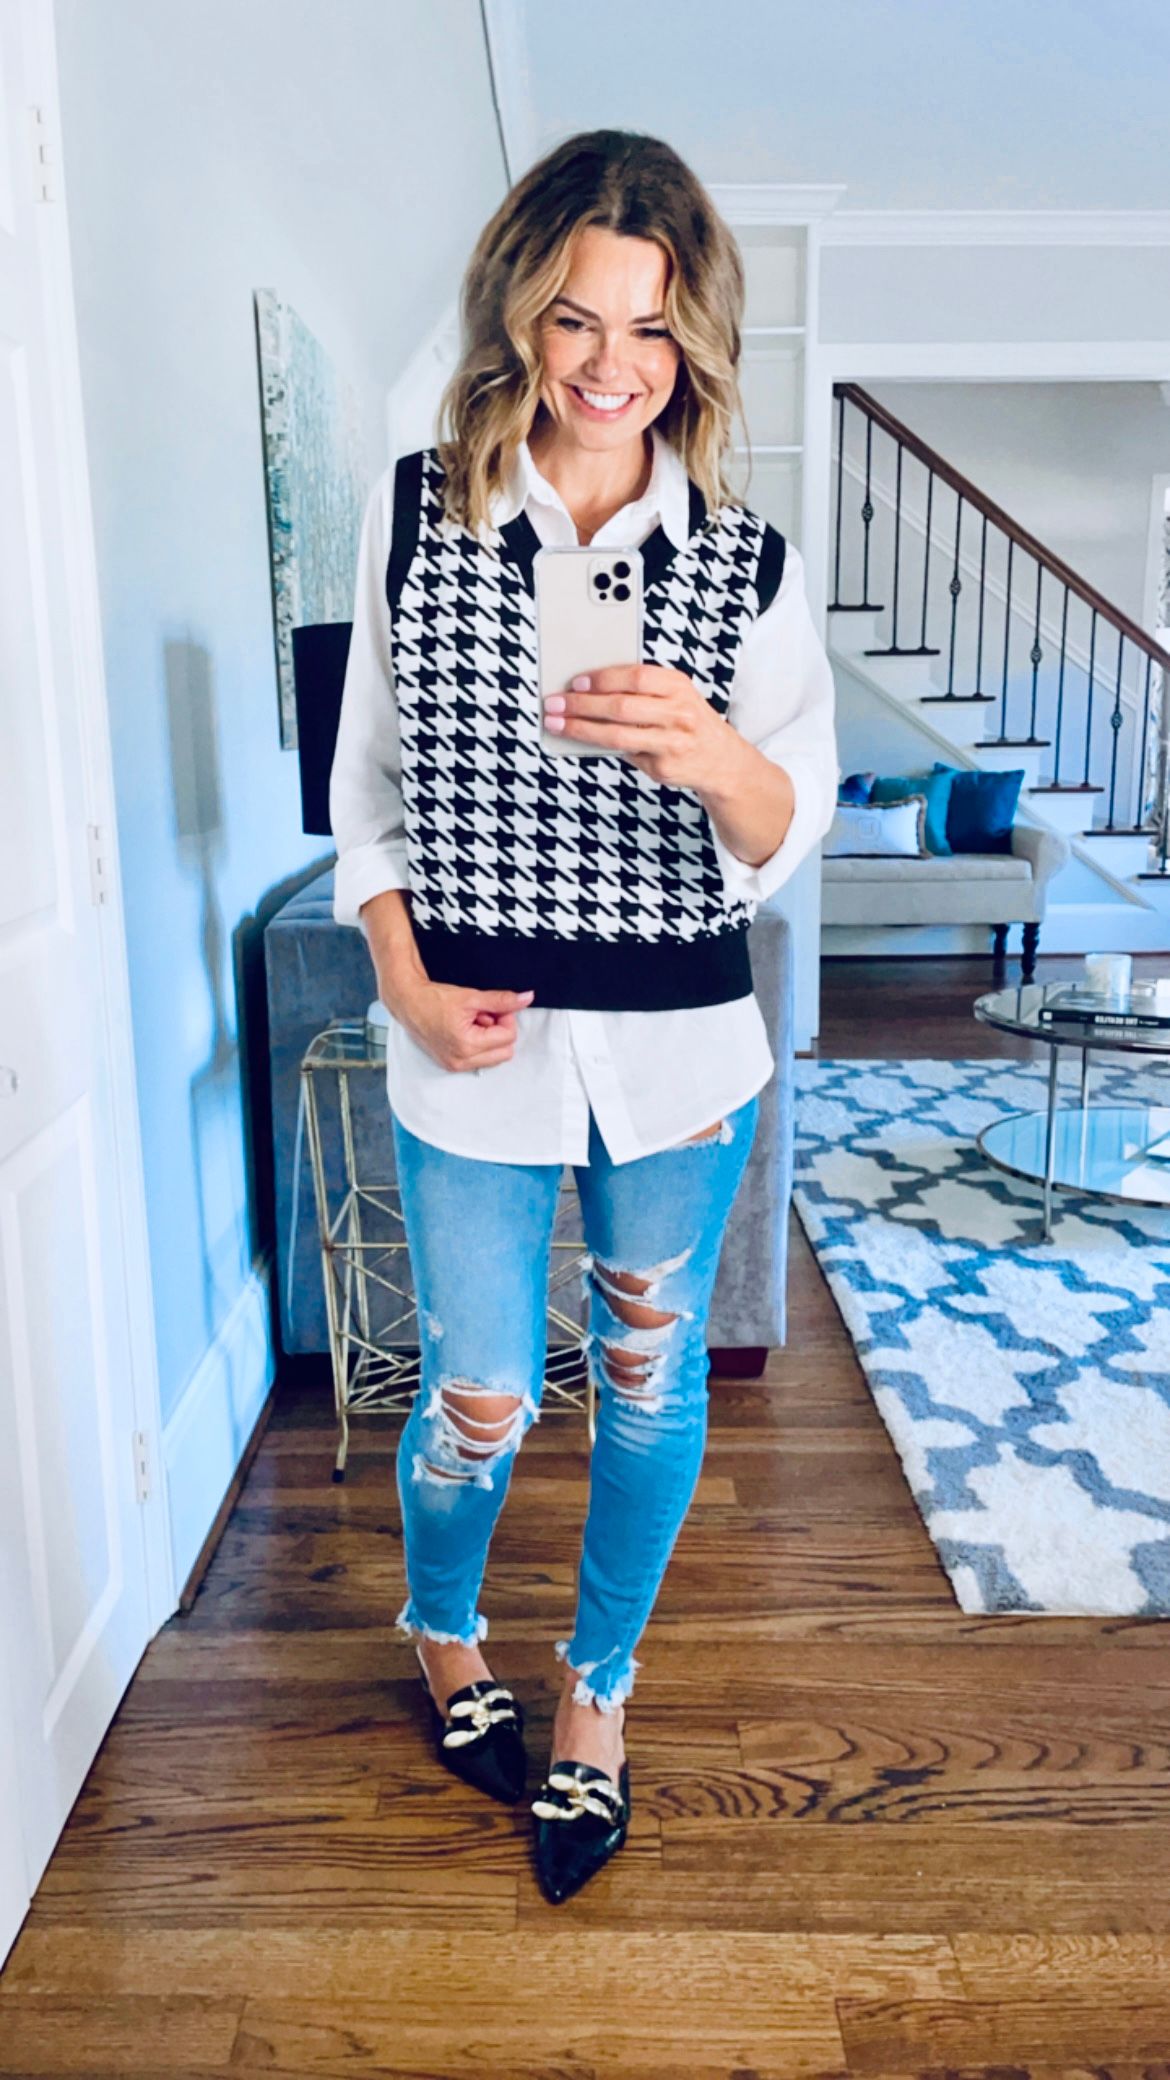 Beaming woman taking a full body selfie in her living room, wearing a white button down shirt with houndstooth sweater over it, denim ripped jeans, and black pointed toe flats